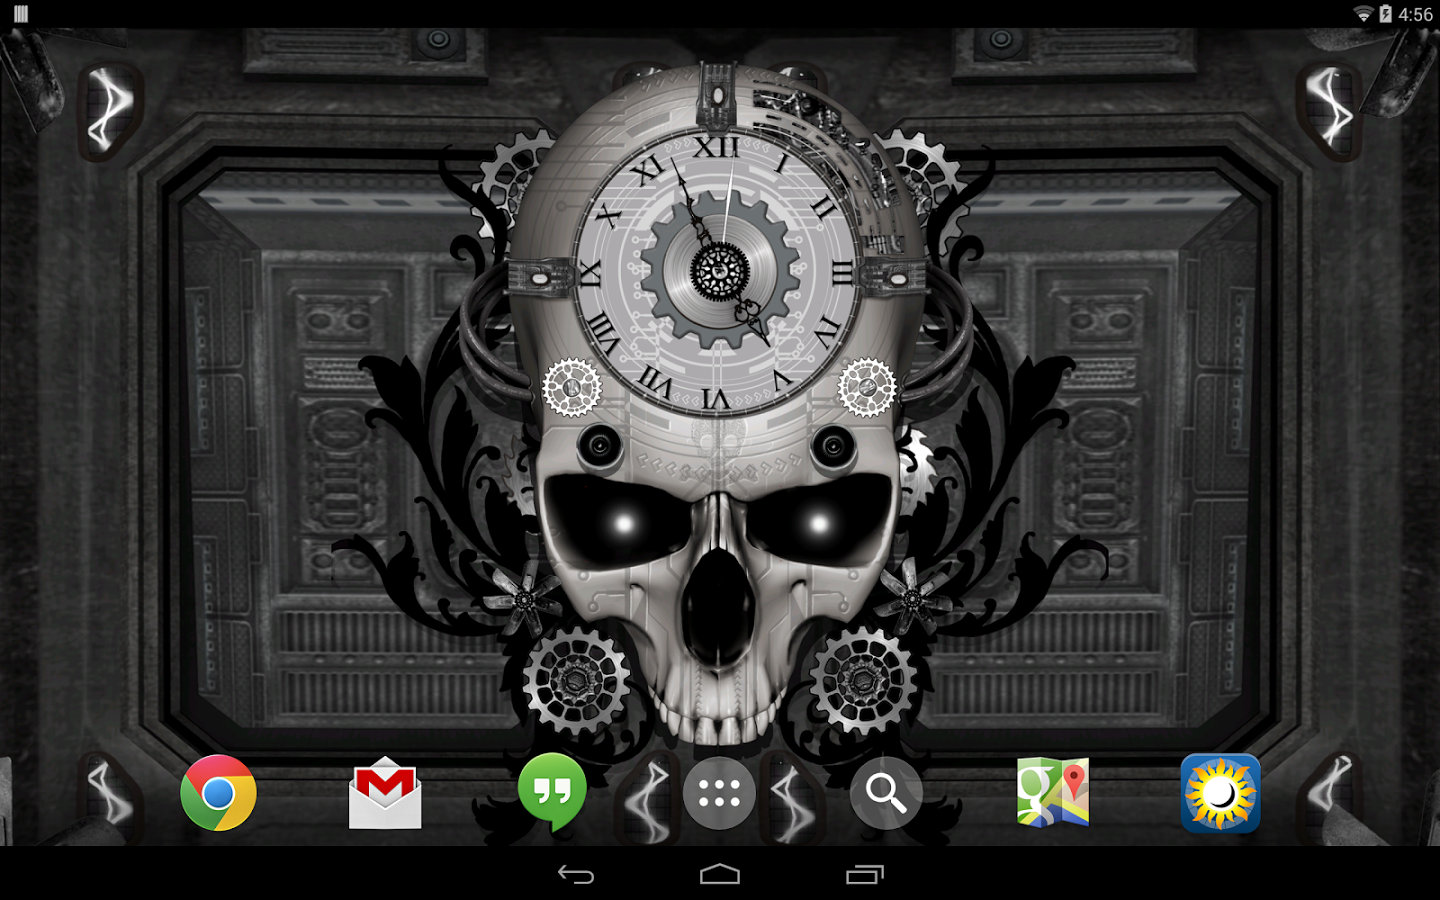 Steampunk Clock Live Wallpaper   Android Apps on Google Play